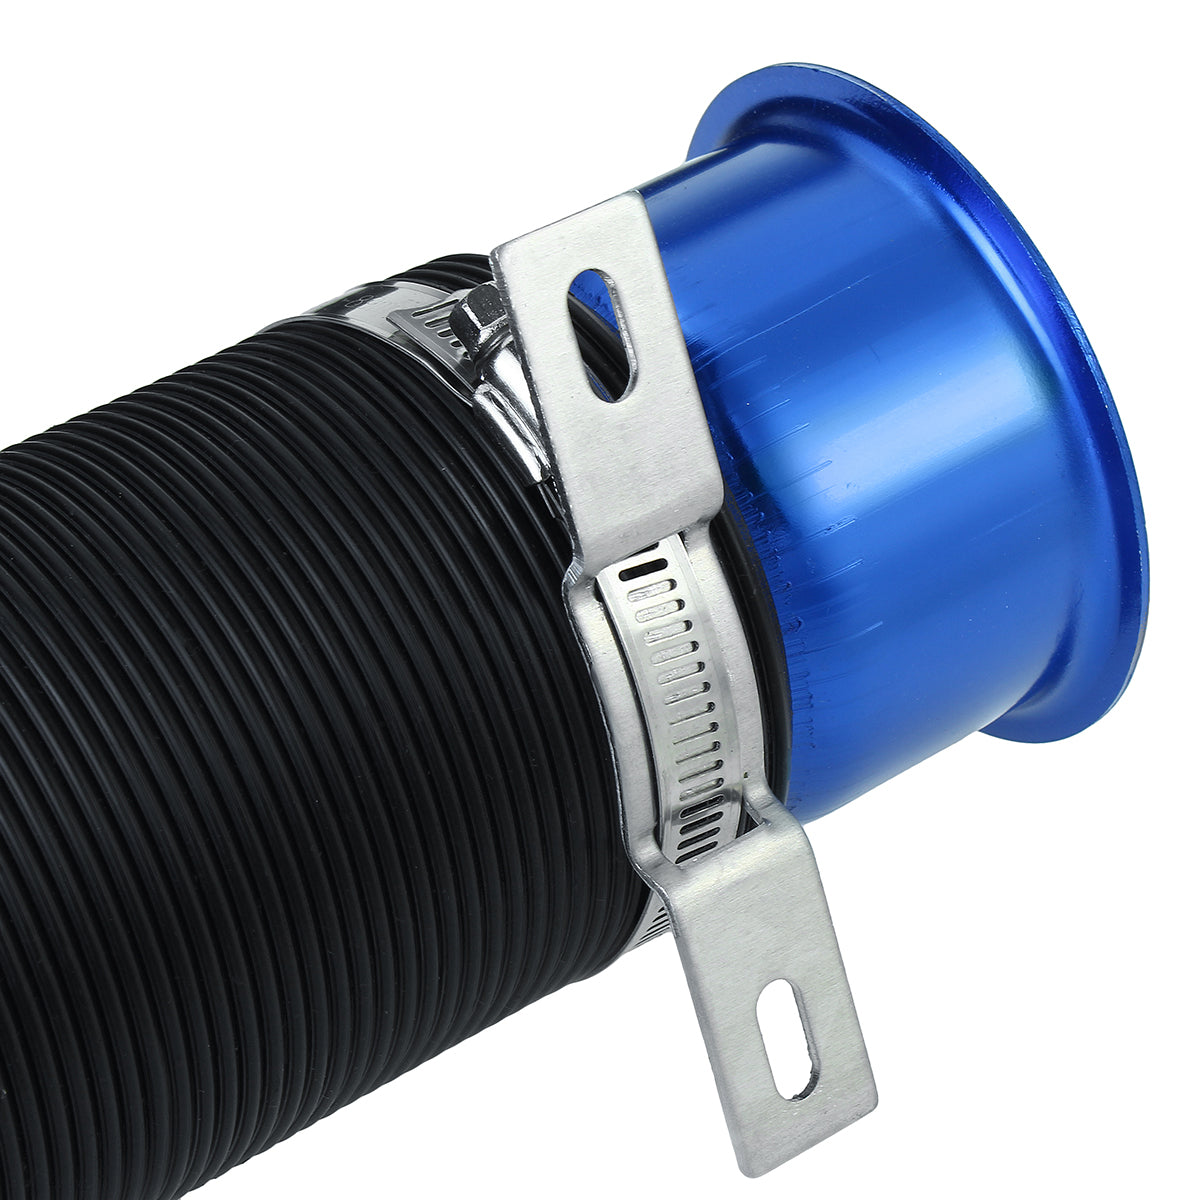 Royal Blue 3Inch Universal Cold Air Intake Feed Flexible Duct Pipe Induction Kit Filter